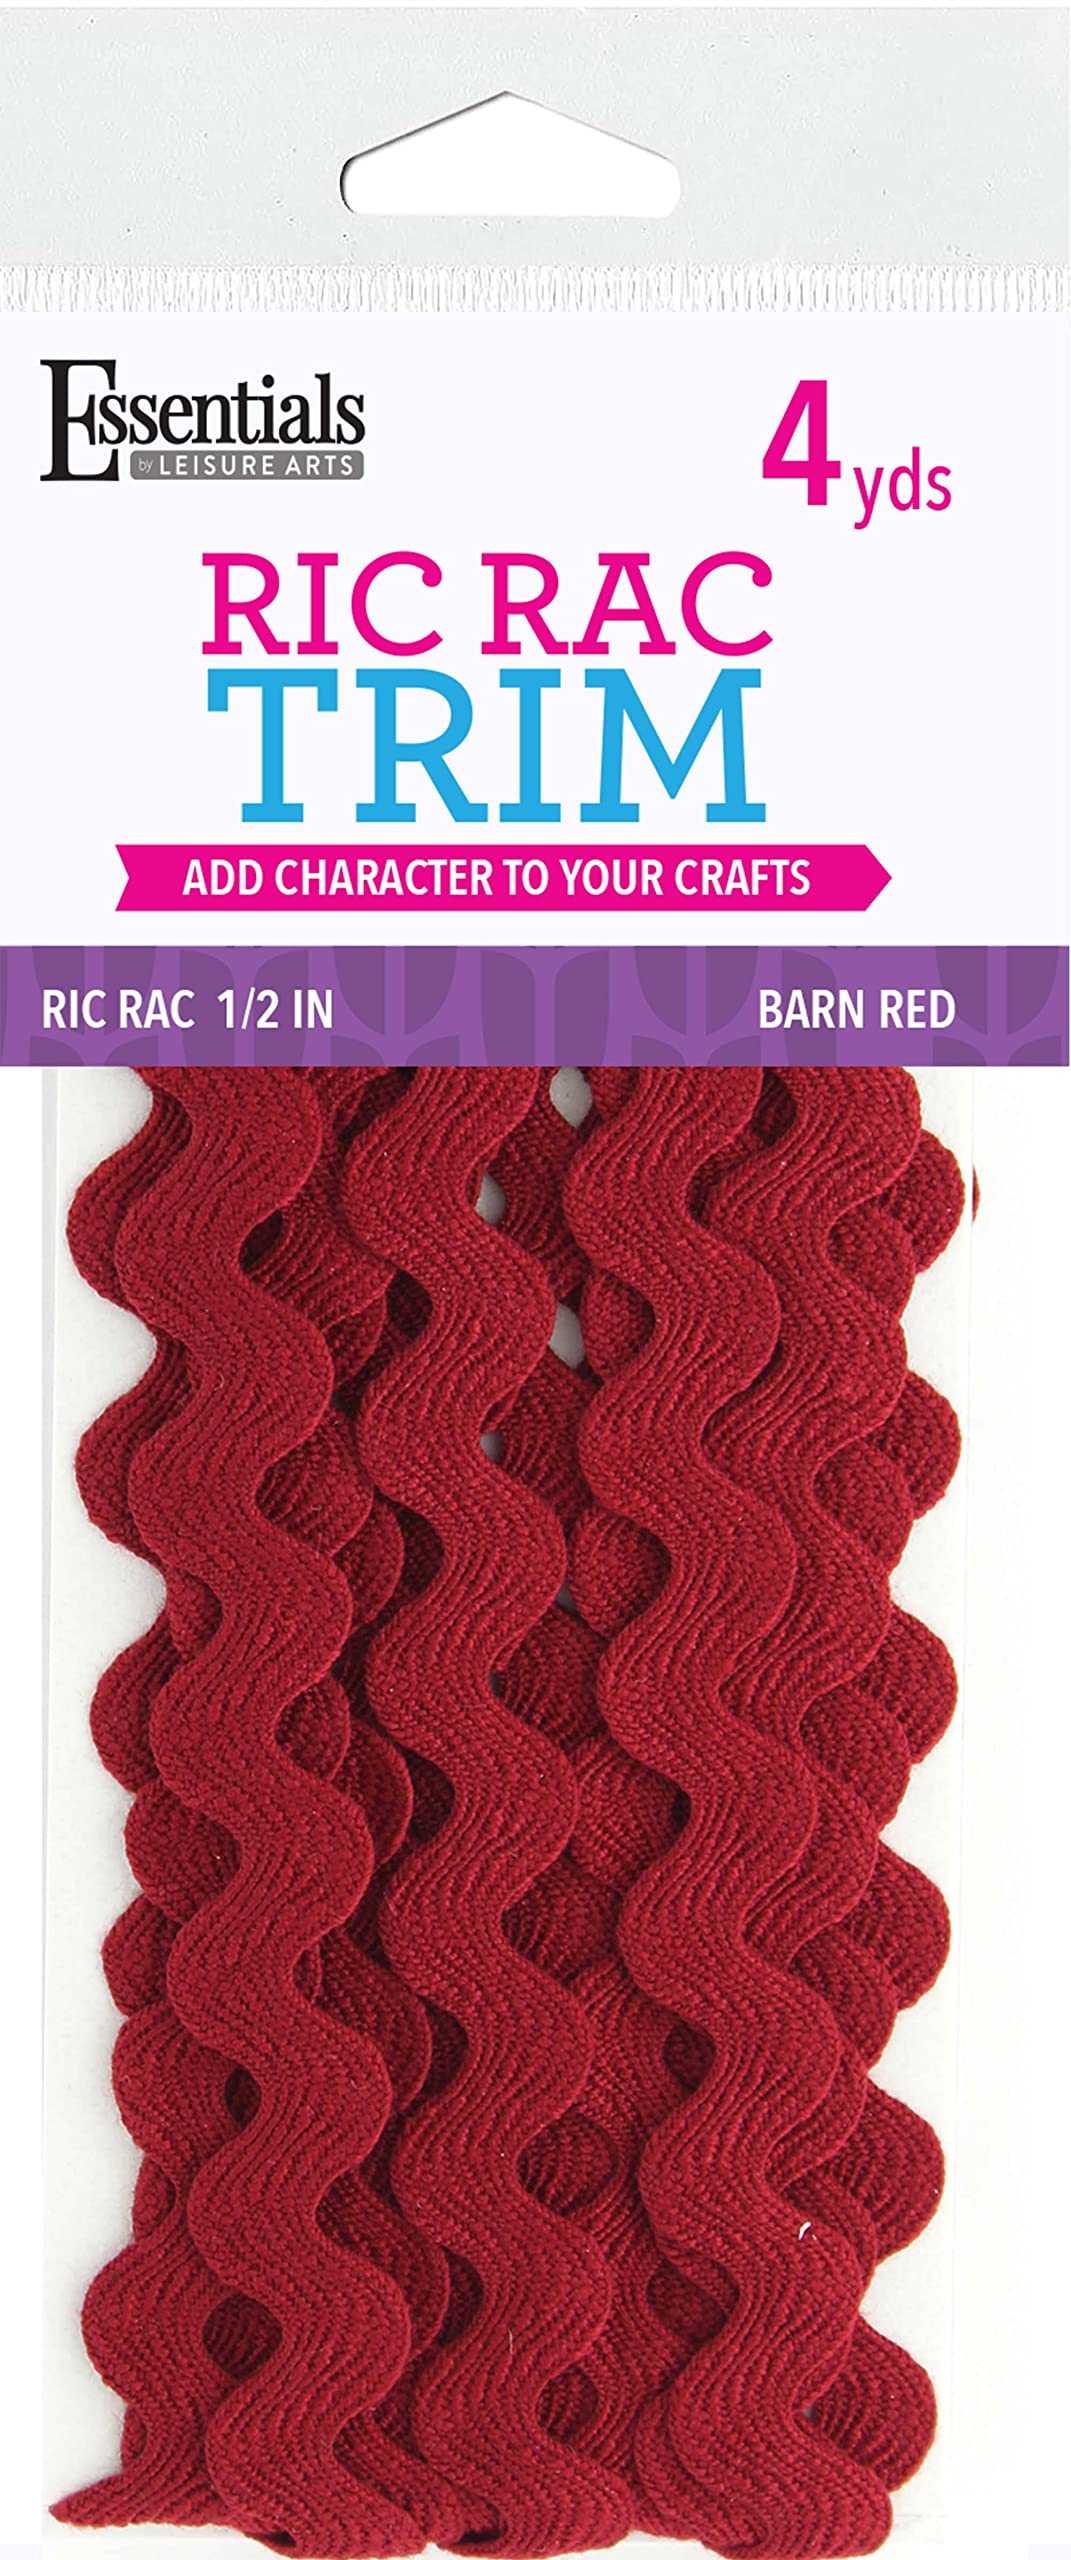 Essentials By Leisure Arts RIC Rac 1/2 4 Yards Barn Red - Rick Rack Trim for